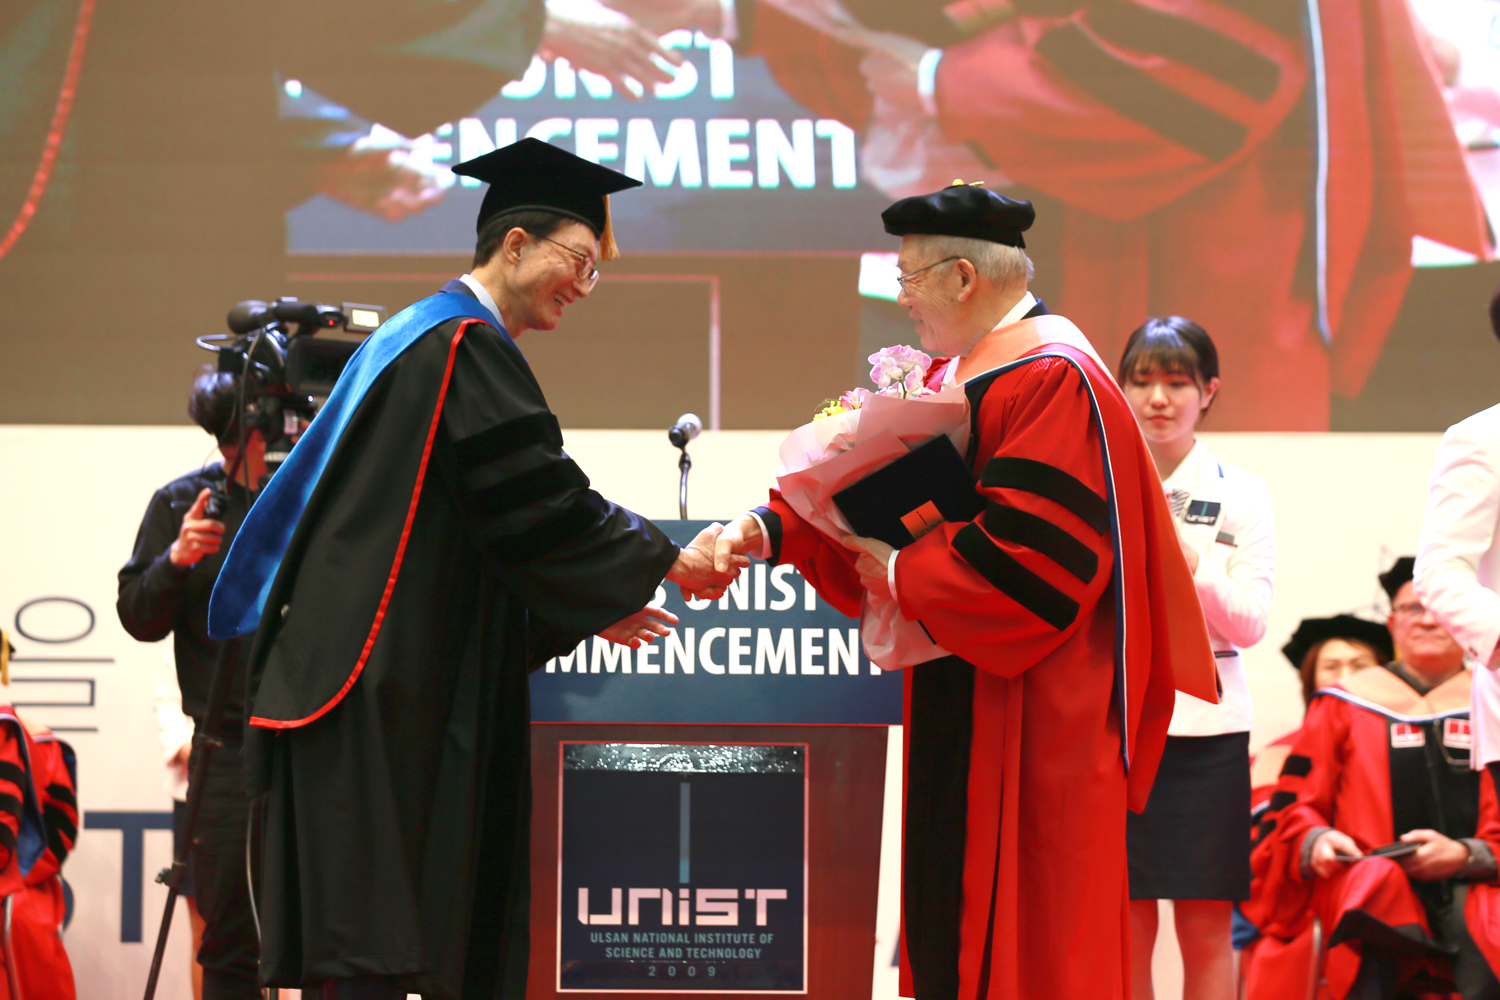 The honorary doctoral degree has been bestowed upon Dr. Nam Pyo Suh at the 2023 UNIST Commencement Ceremony on February 16, 2023.